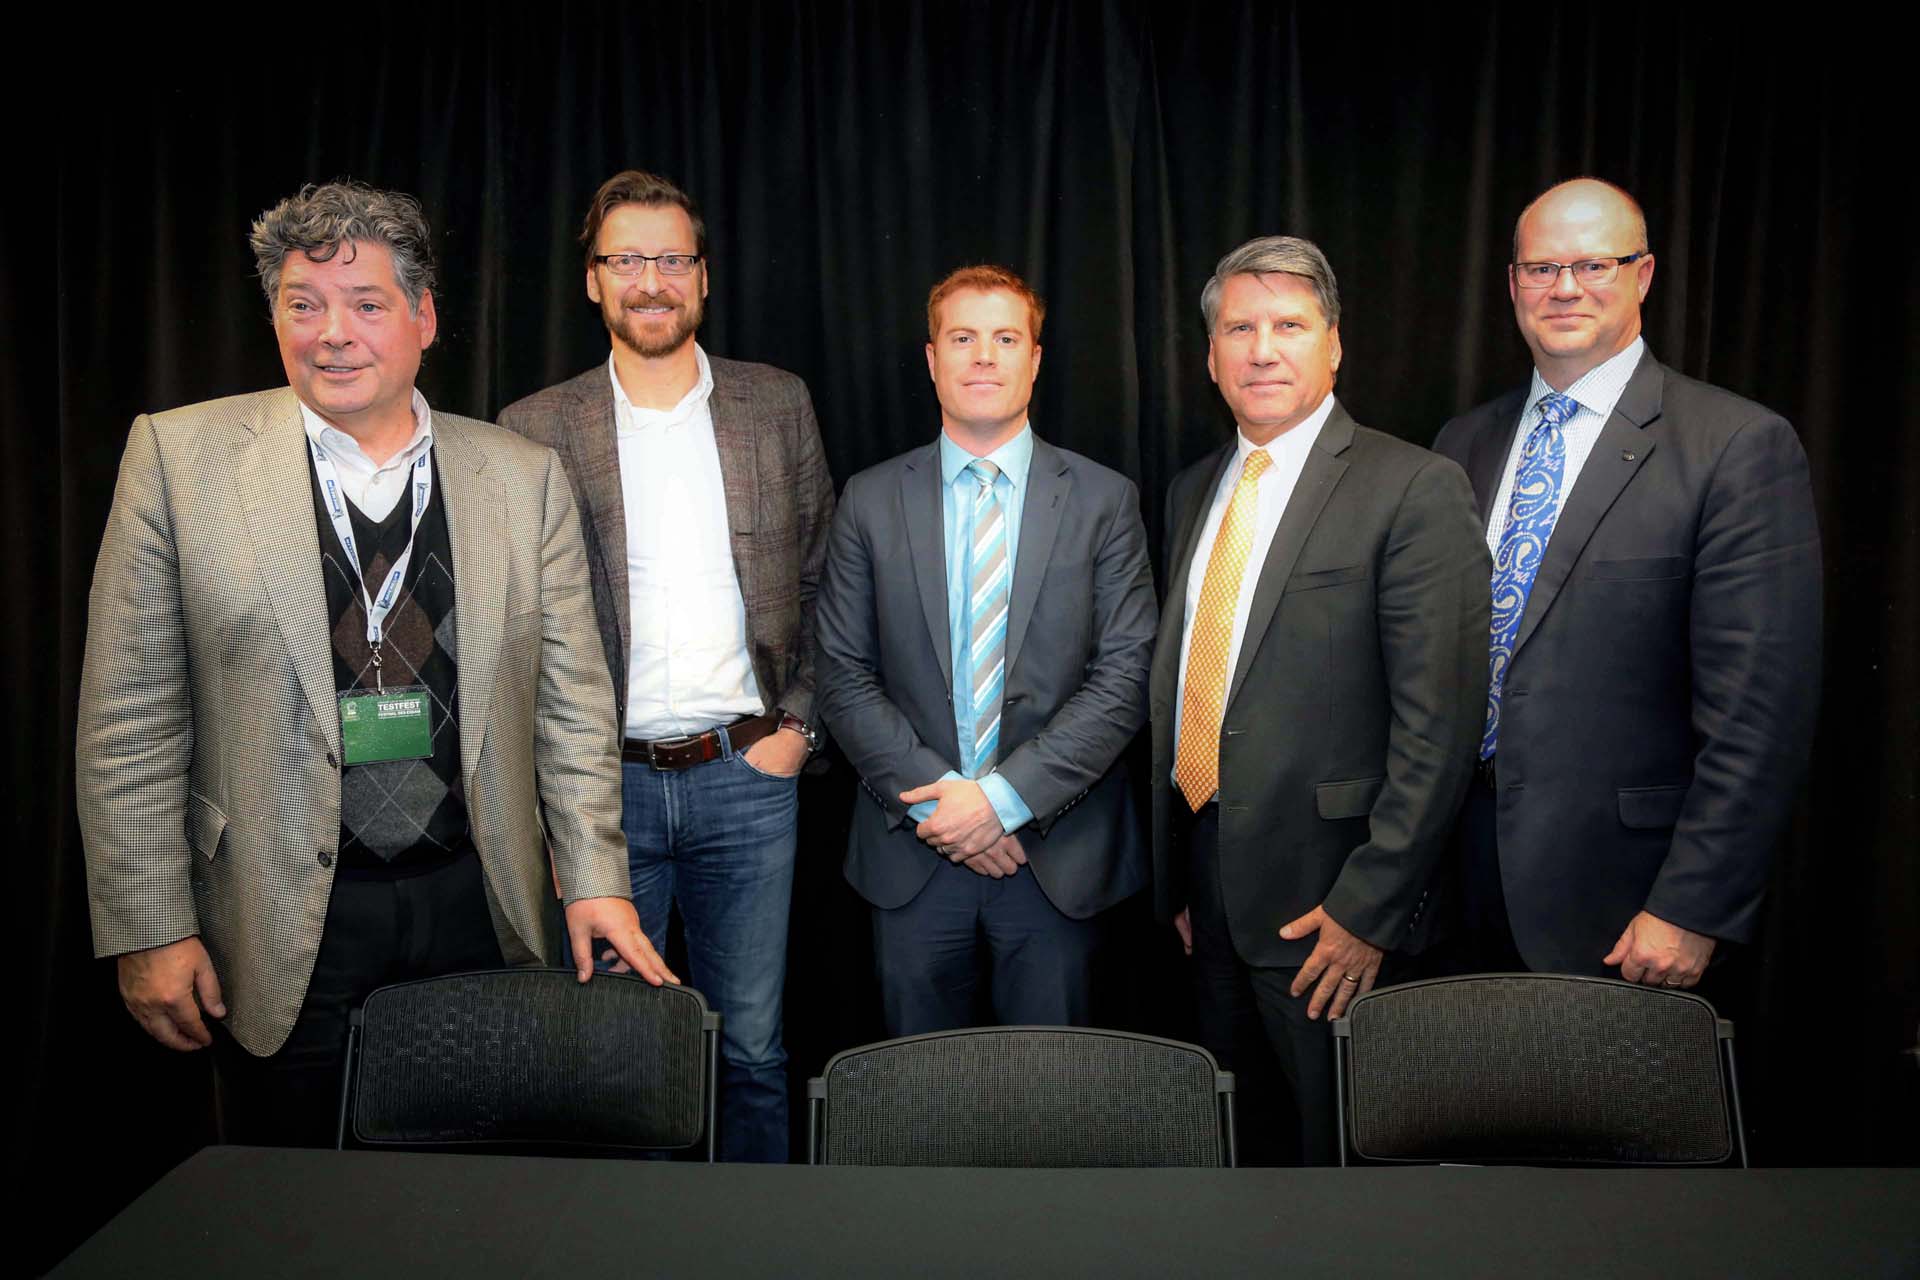 From left: David Paterson, Vice President of Corporate Affairs, General Motors of Canada; Wolfgang Hoffmann, President, Jaguar Land Rover Canada; François Lefèvre, Chief Marketing Manager – Nissan Leaf, Nissan Canada; Don Romano, President and CEO, Hyundai Canada; Ted Lancaster, Vice-President and COO, Kia Canada